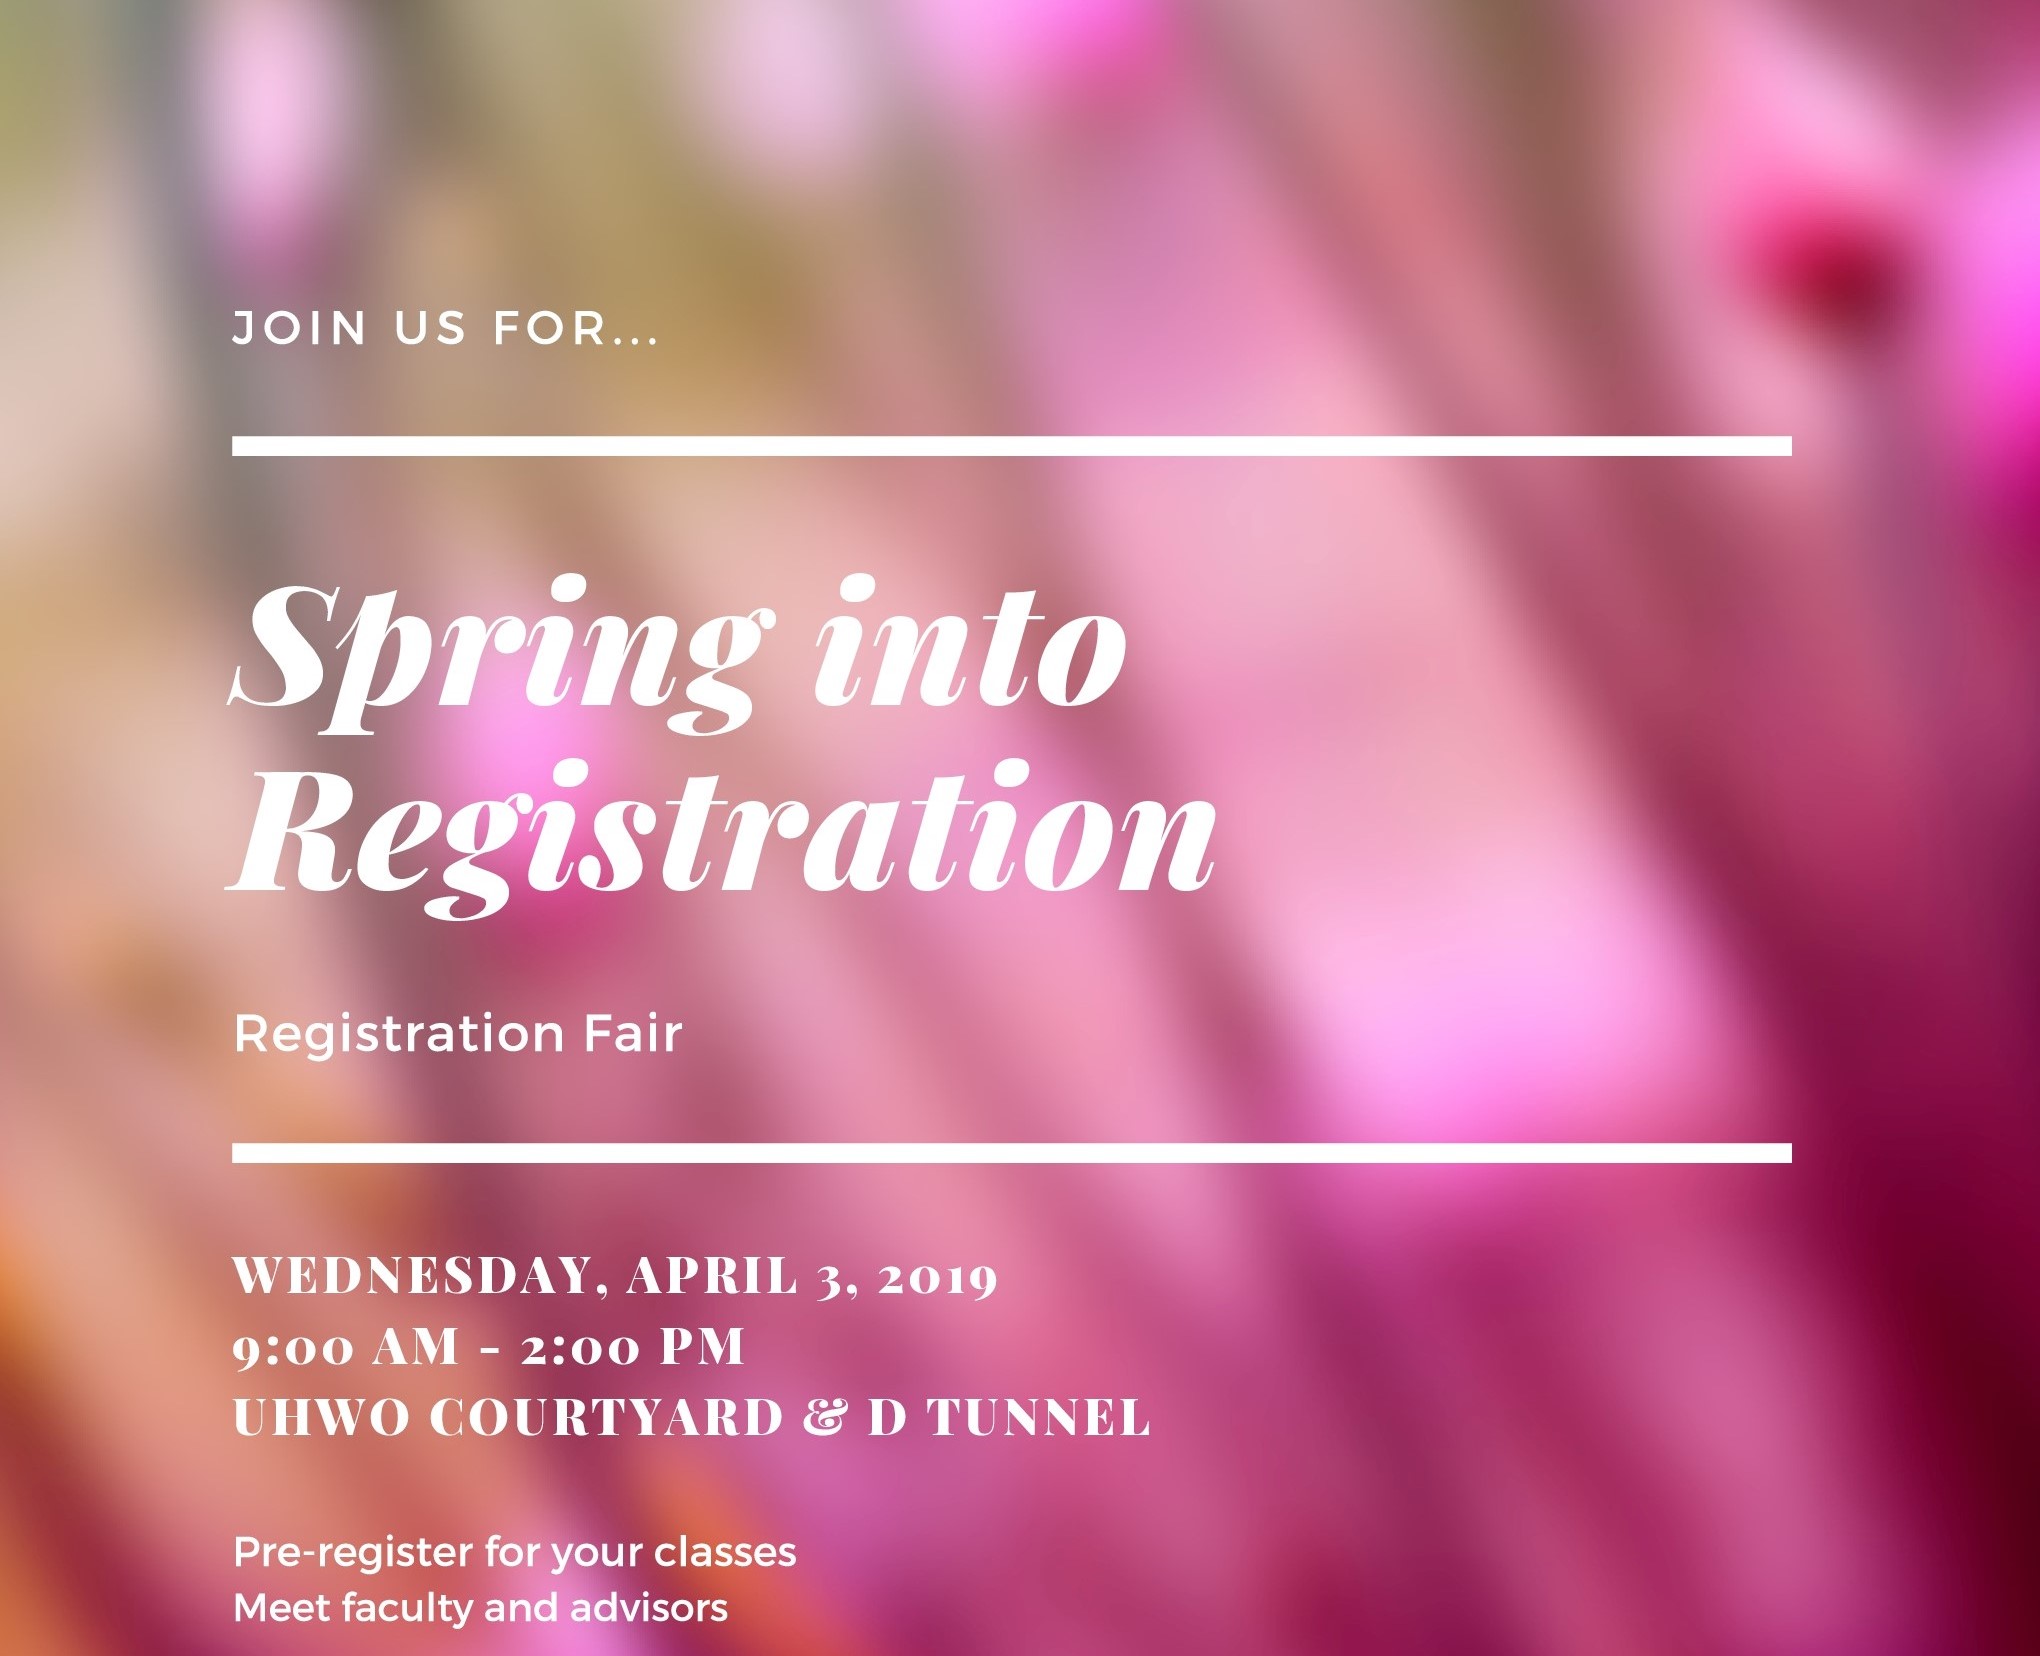 Flier for Spring into Registration event listing date, time, and place. The flier also states that it is a pre-registration event. The background appears to be an out of focus photograph of a pink flower